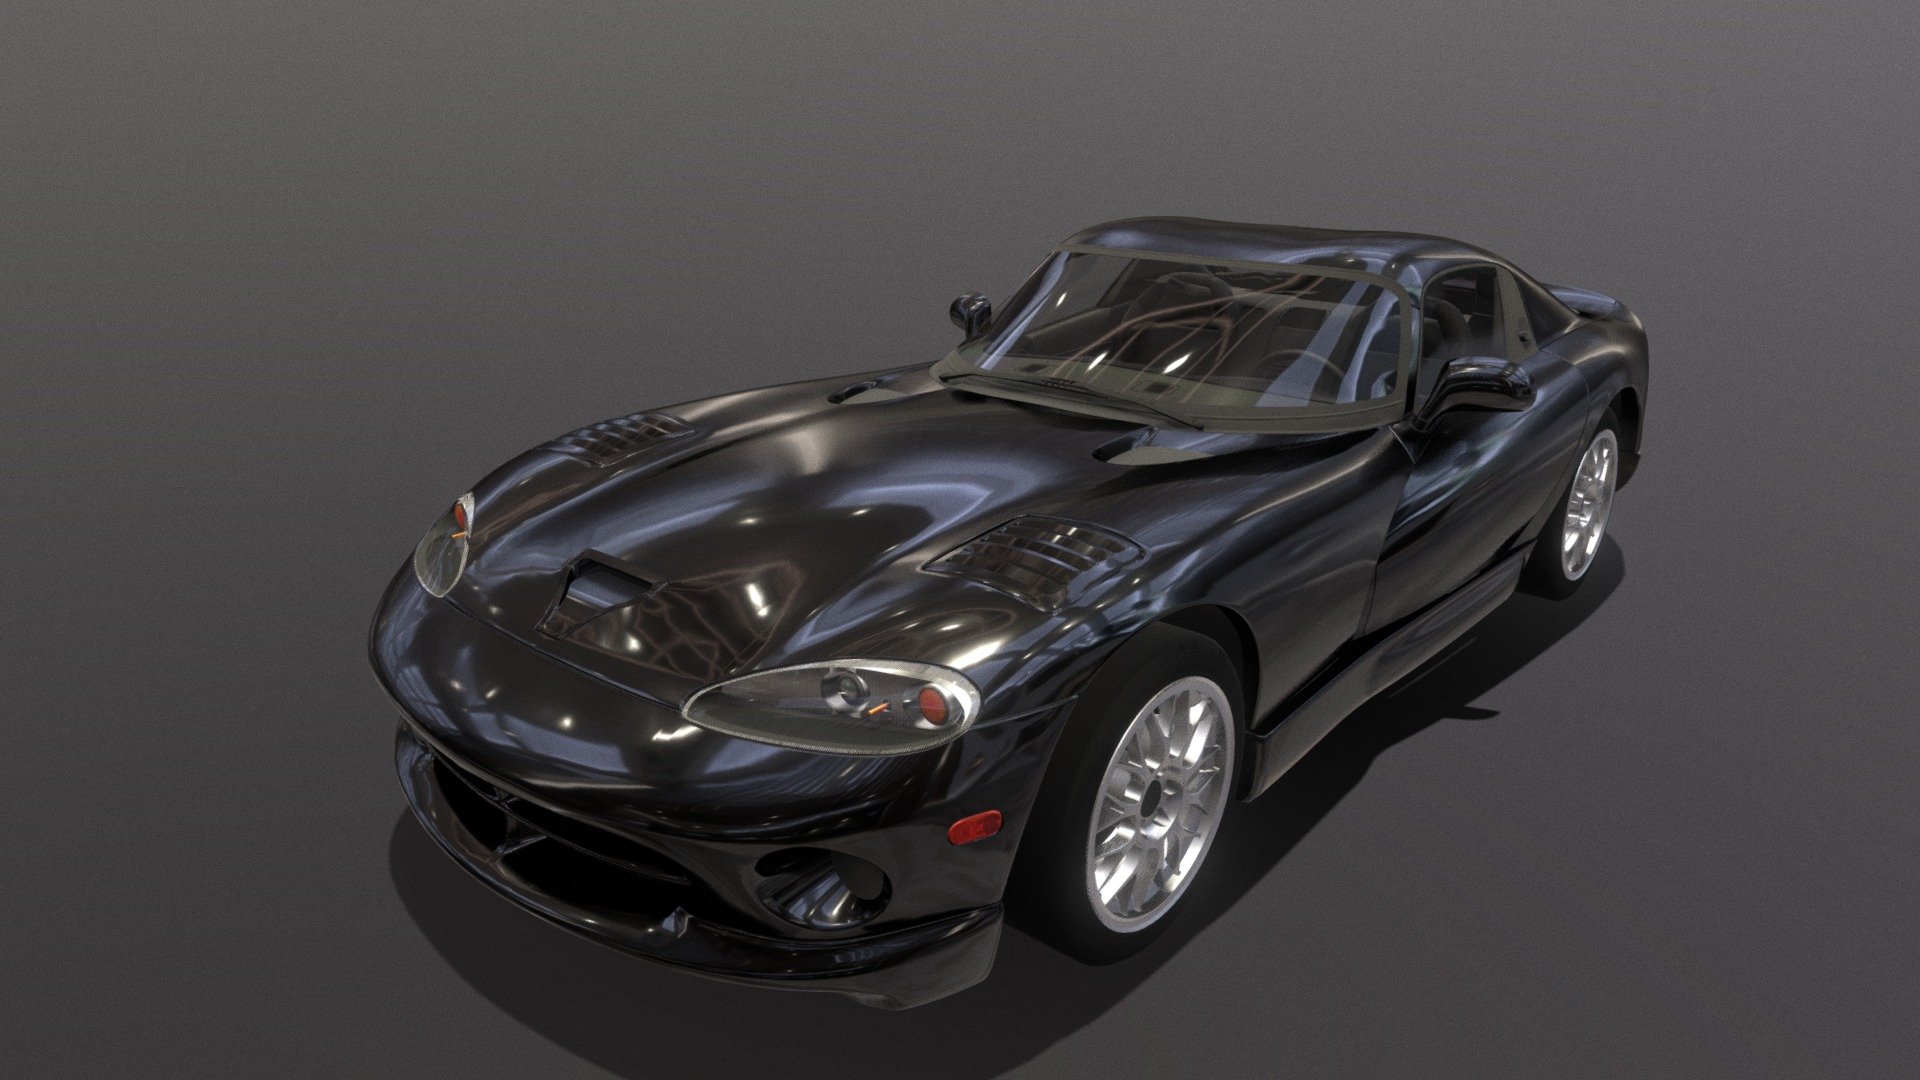 This car model is very detailed, realistically made with blender. All the headlights, breaklights, steering wheel, reverse light, speed and other gauge have different meshes.
It is optimized for mobile devices, and can also be used on a AAA game.
Model pivot is aligned along Z axis, default alignment needed for vehicles in game engines.
Textures size - 2048 x 2048.
Works very well in any gaming engine.
Optimized for mobile devices.
FBX Format 3d model